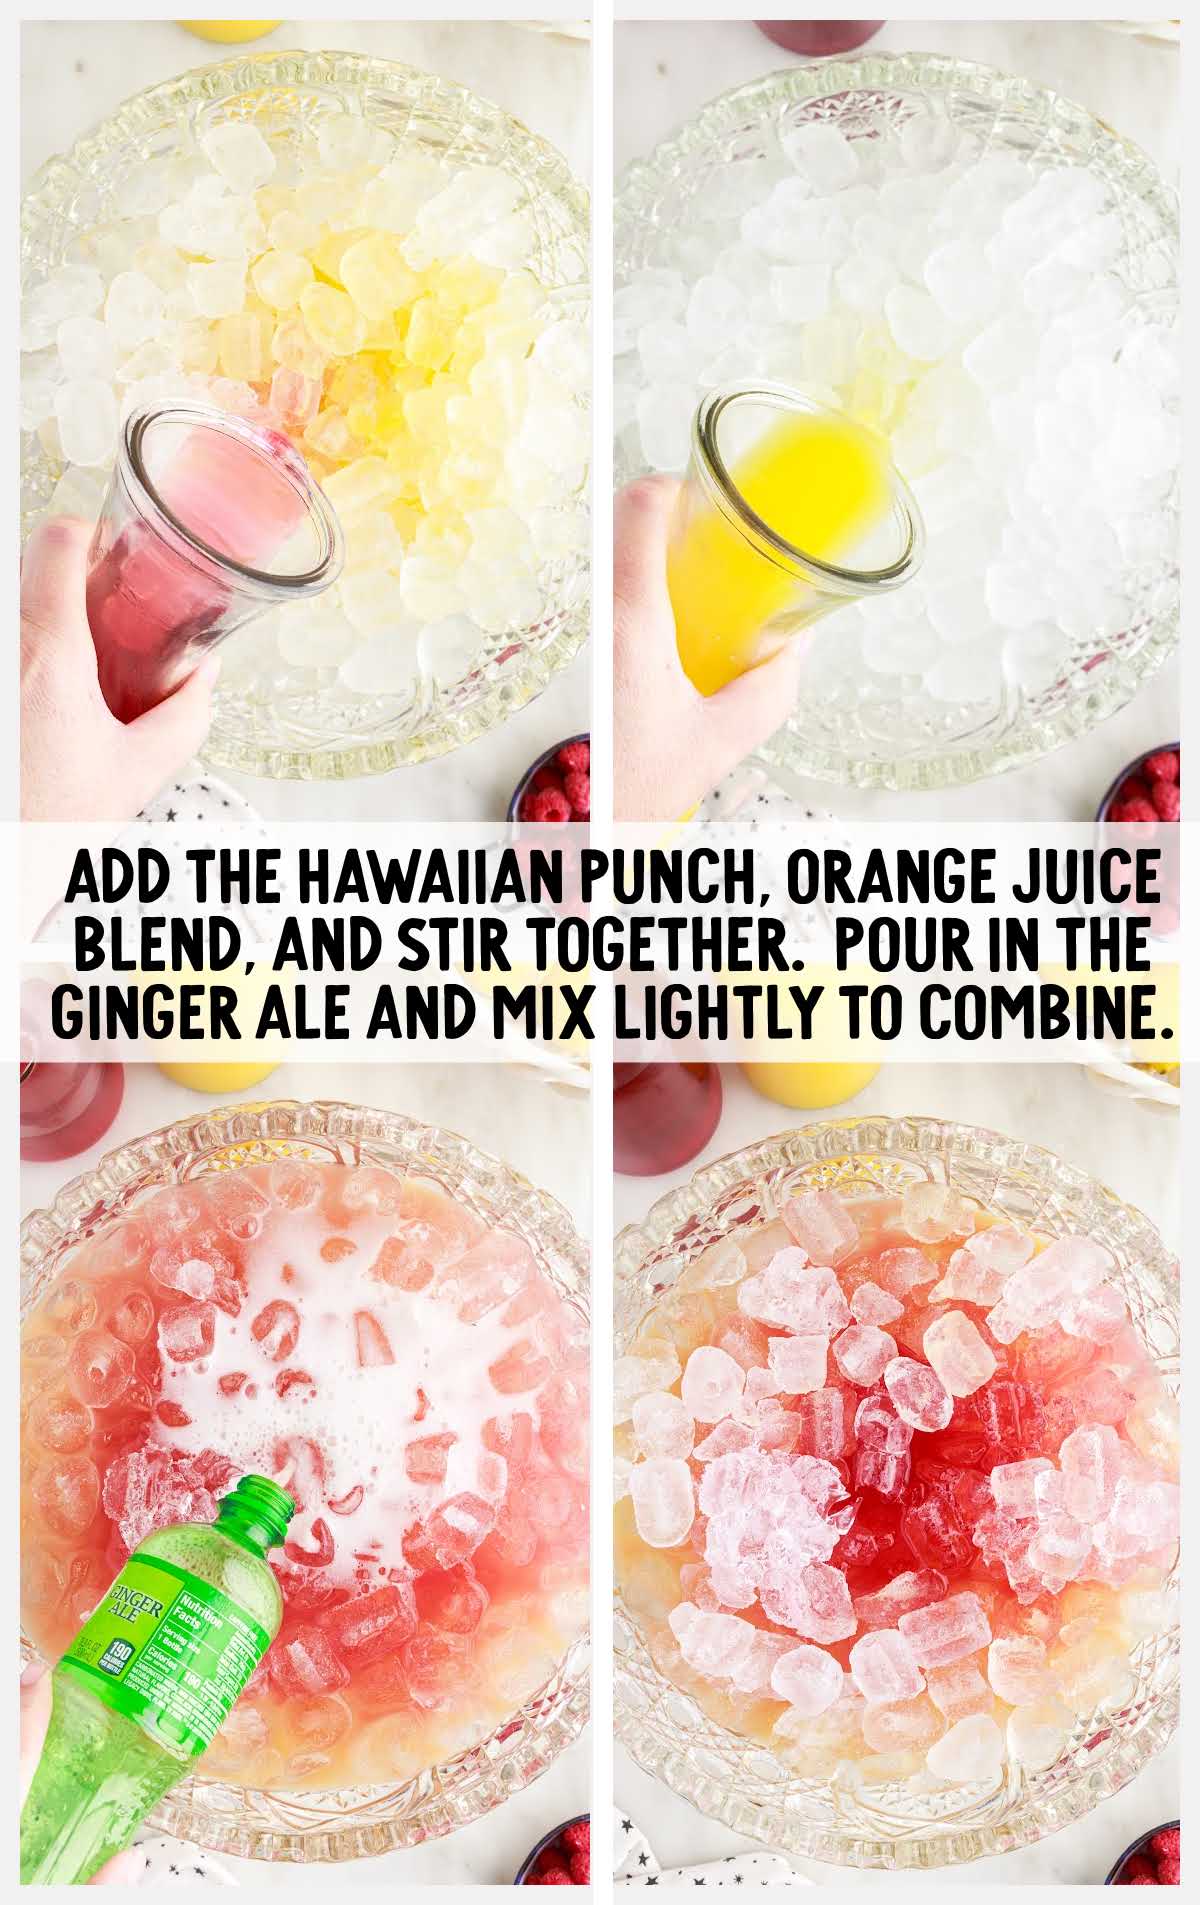 Hawaiian Punch and orange juice blend added to the punch bowl of ice